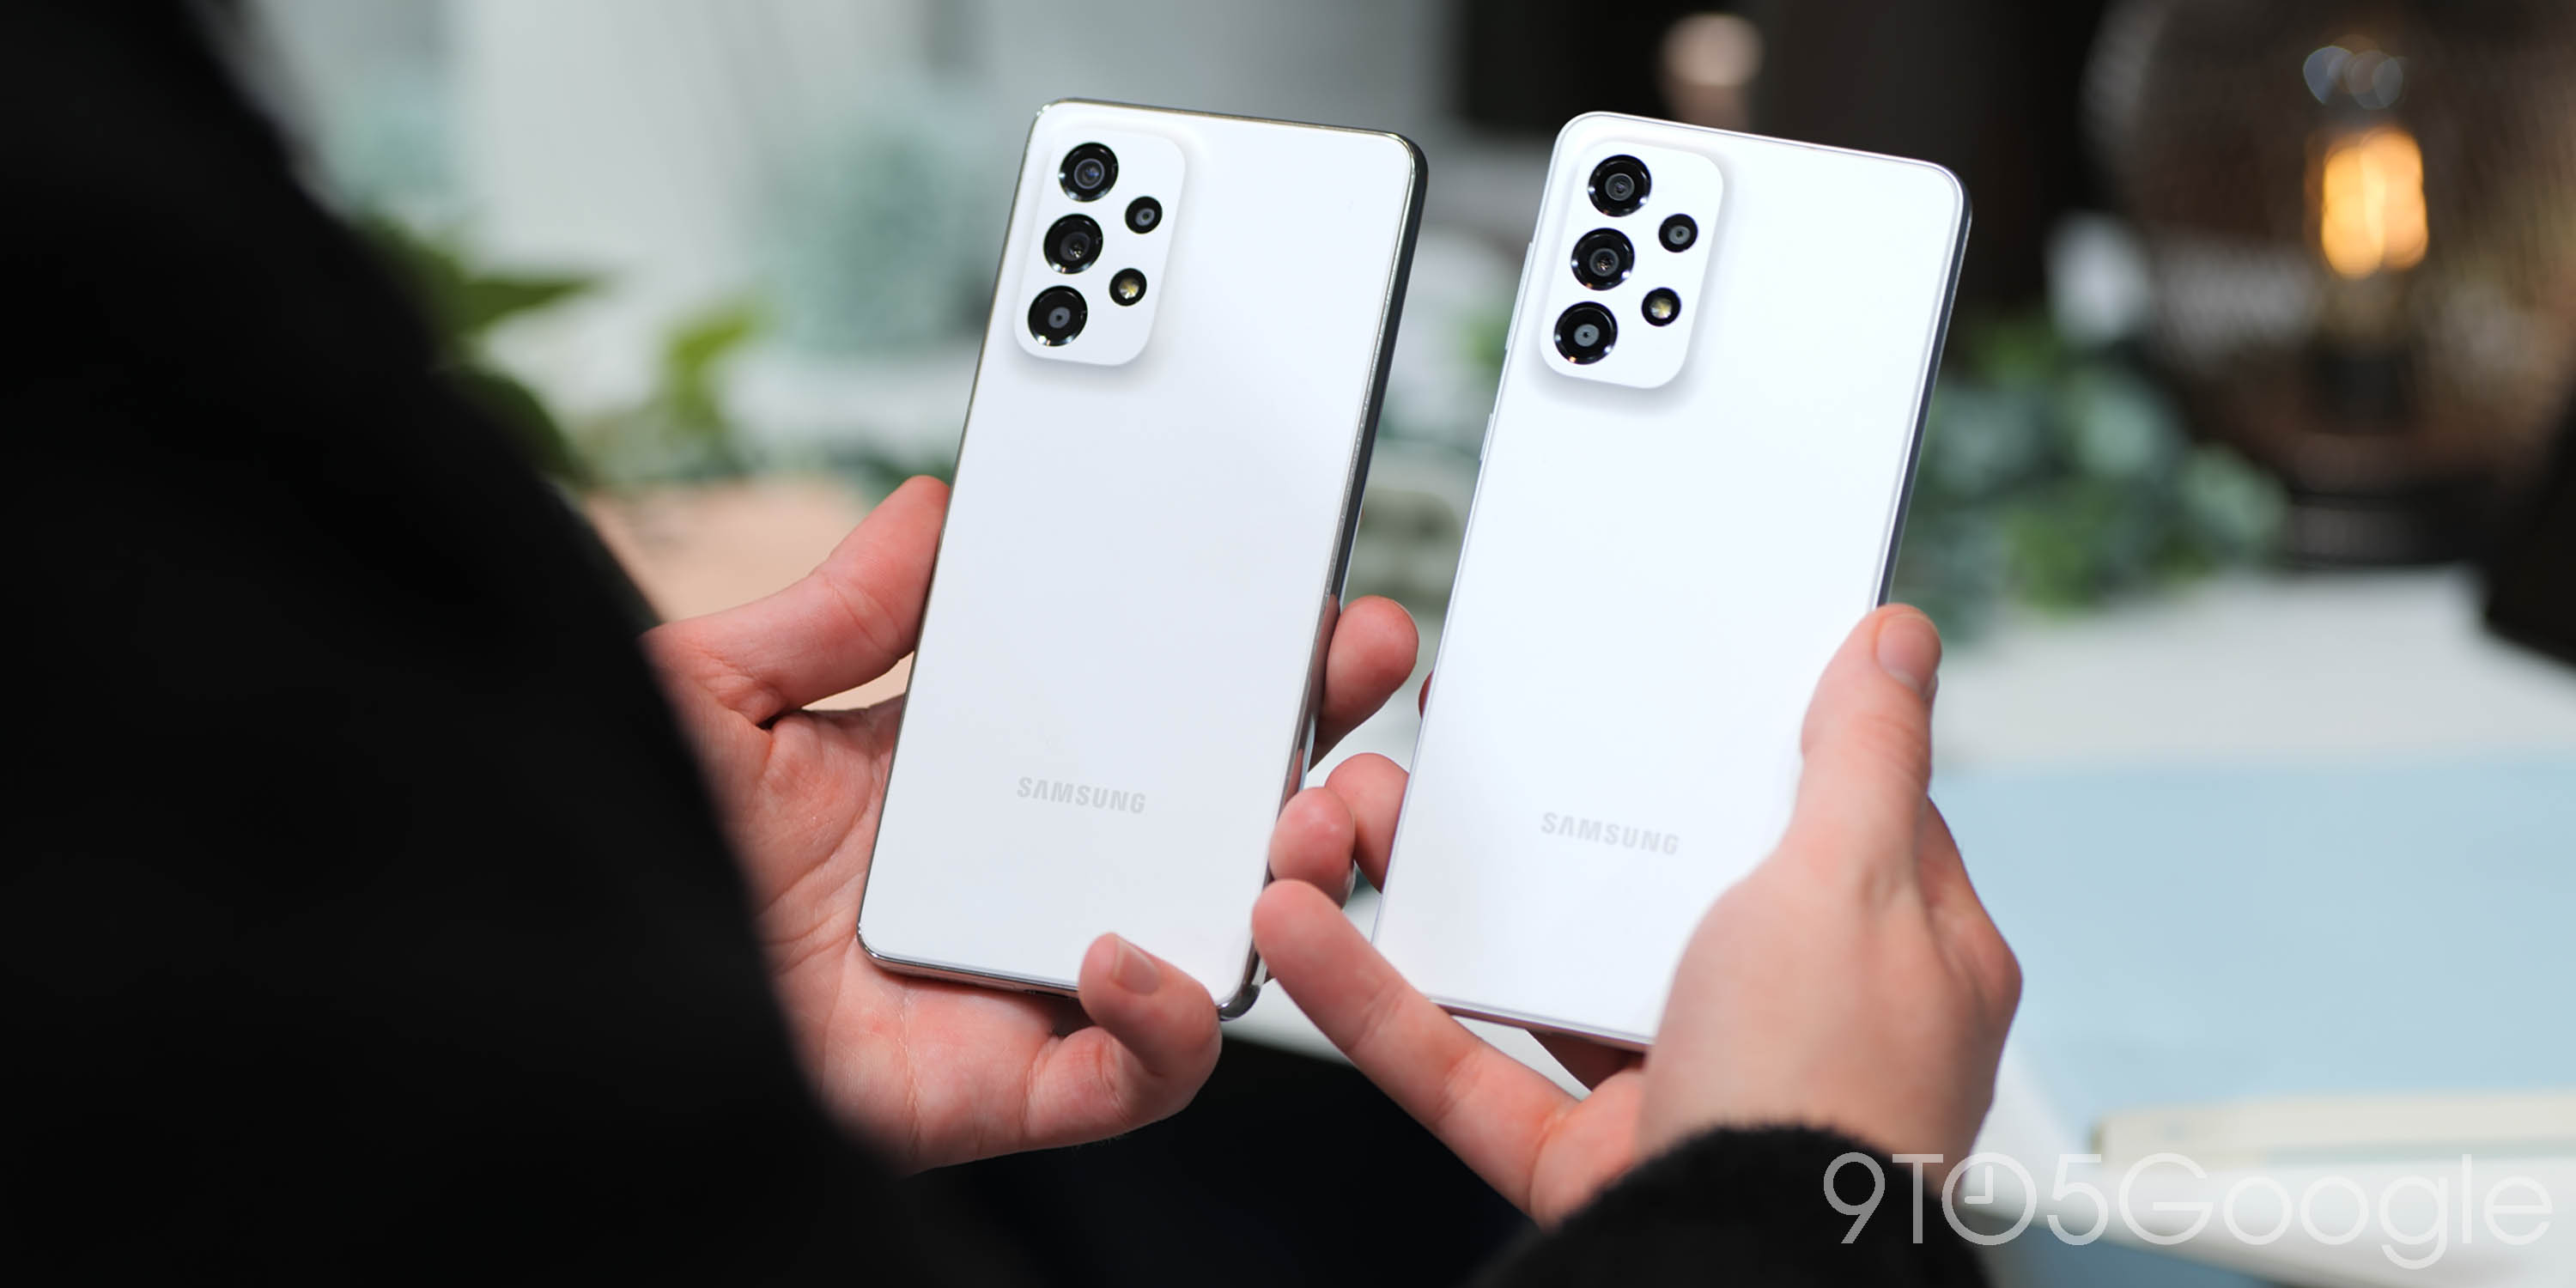 Galaxy A33 5G and Galaxy A53 5G in Awesome White colorway